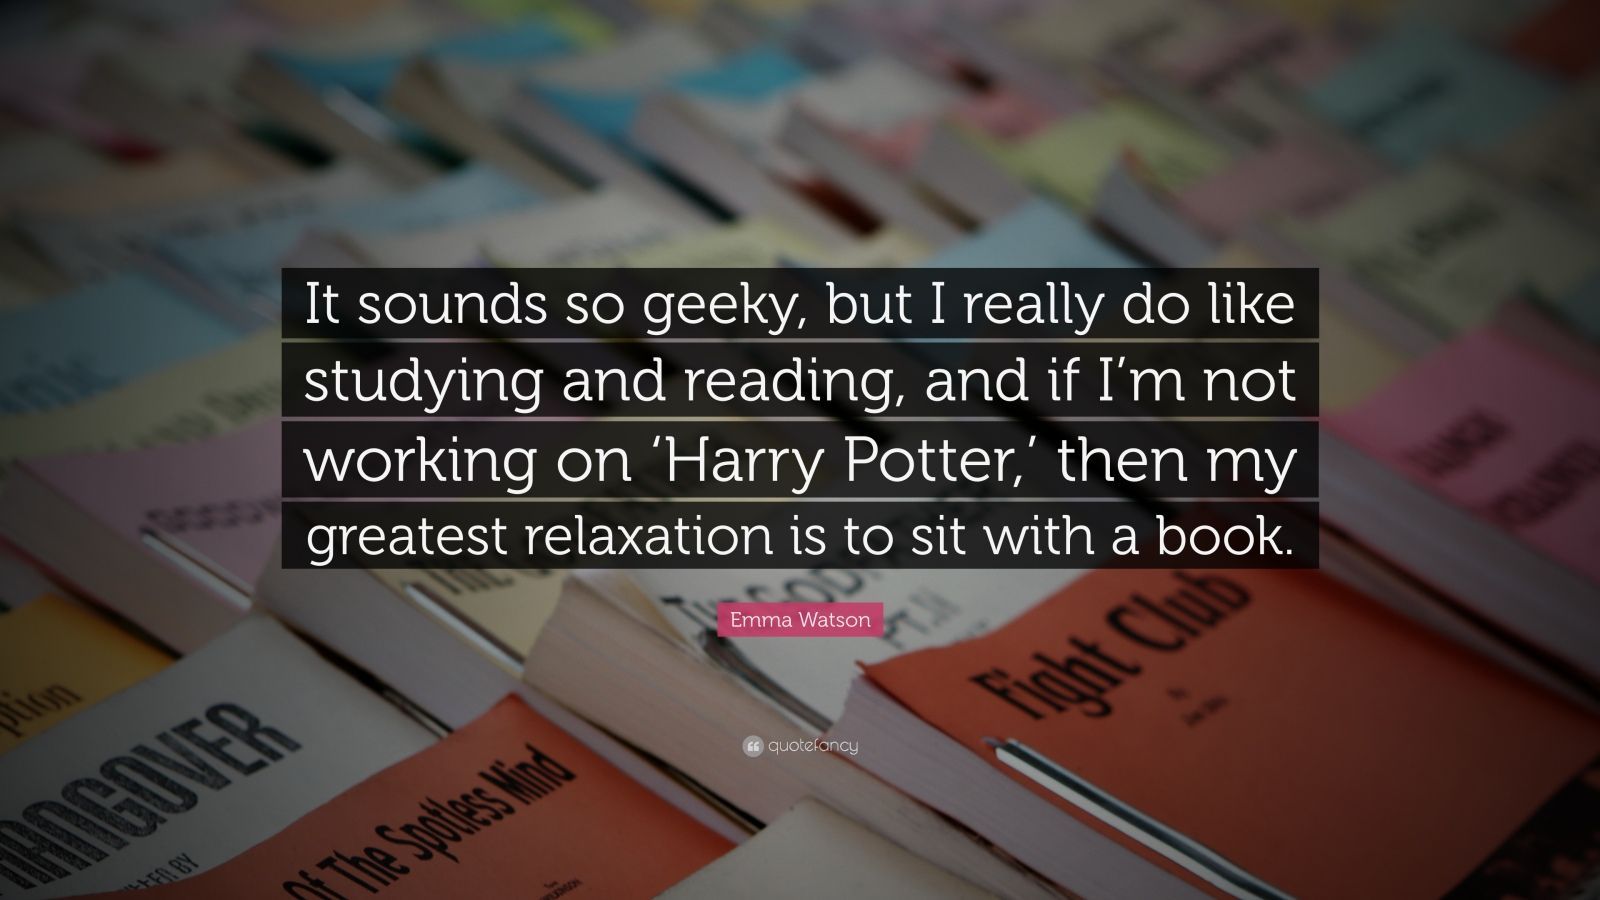 Emma Watson Quote: “It sounds so geeky, but I really do like studying and reading, and if I'm not working on 'Harry Potter, ' then my greates.”